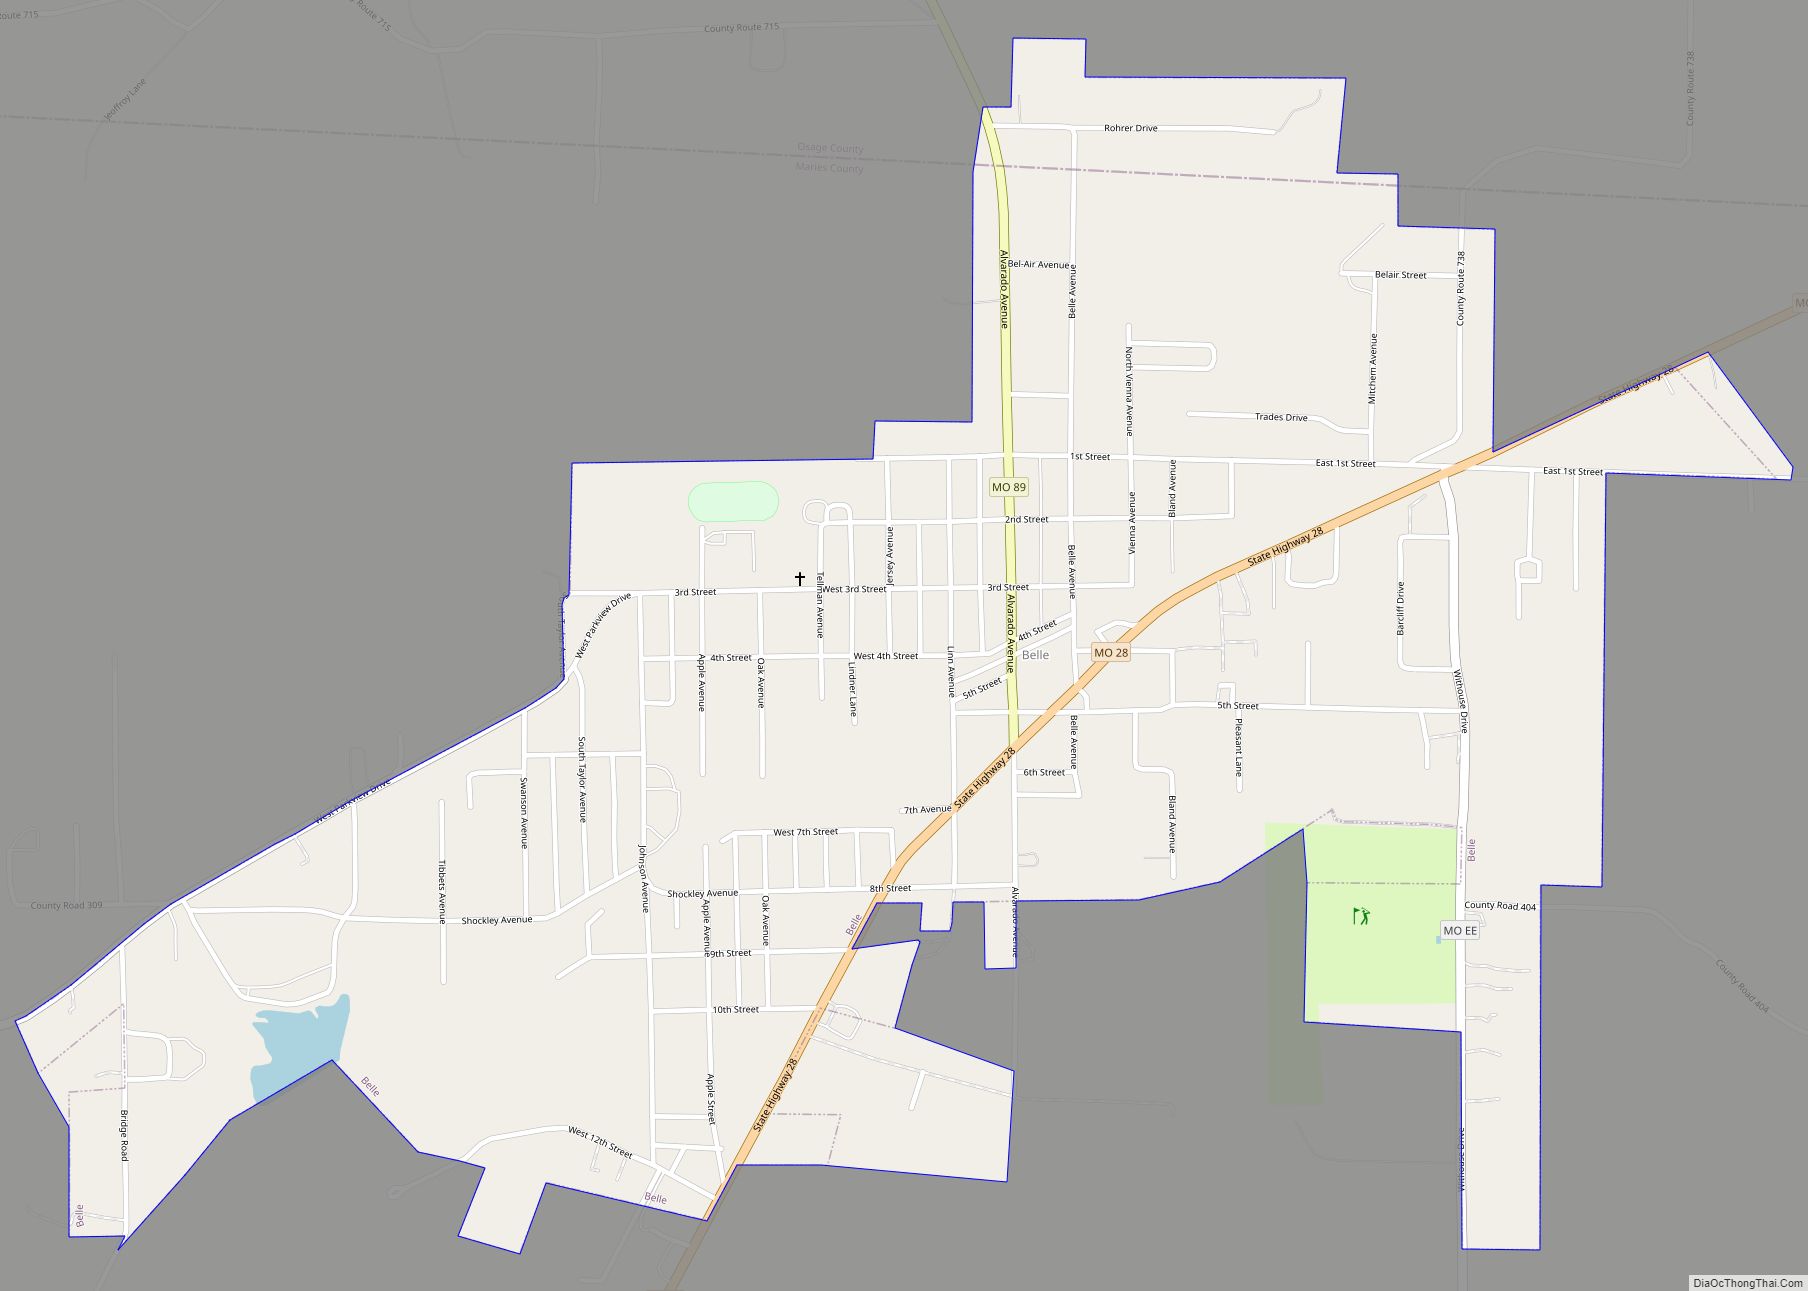 Map of Belle city